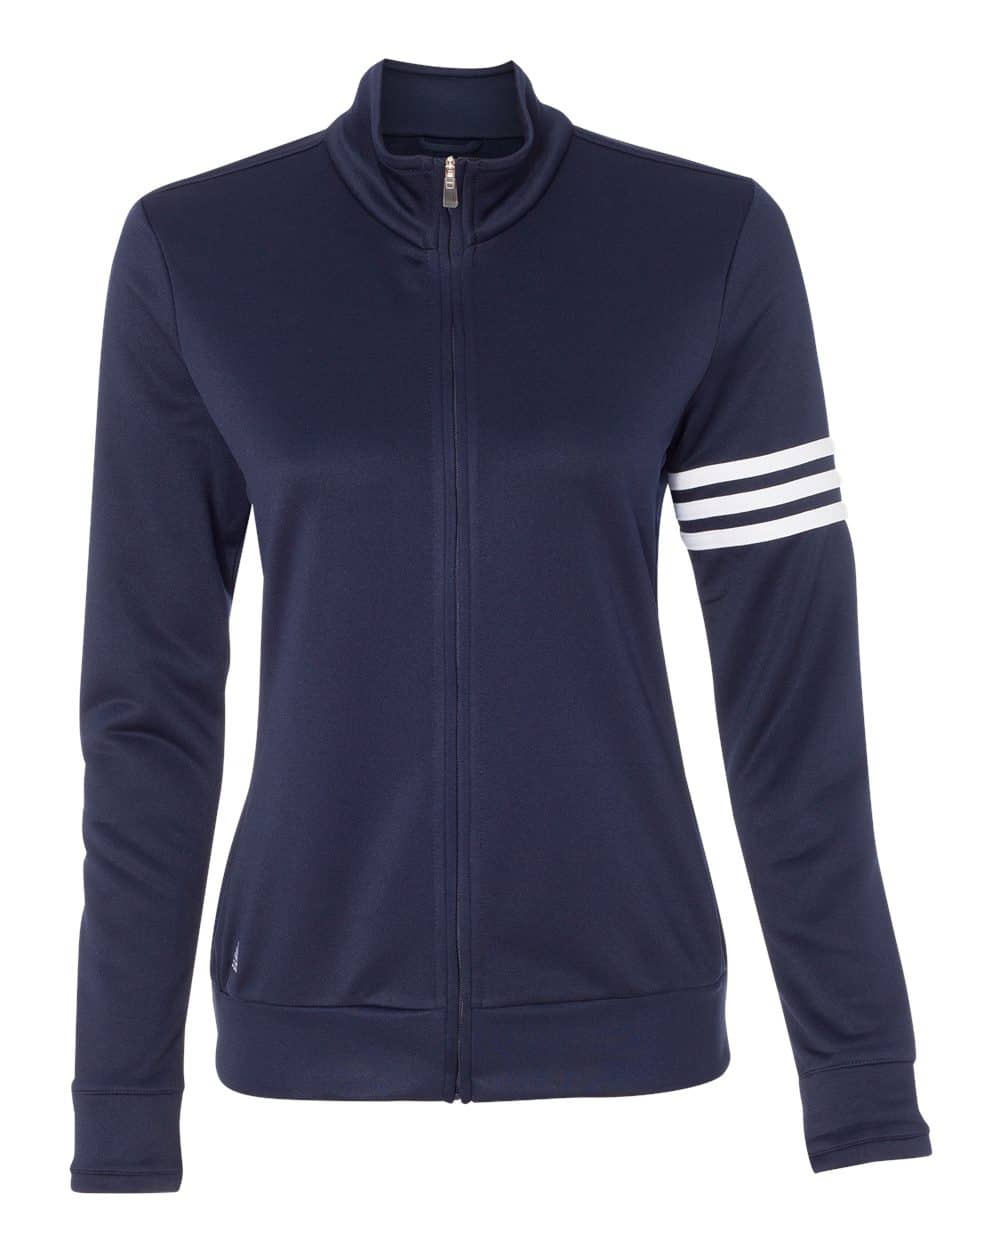 Adidas - Women's 3-Stripes French Terry Full-Zip Jacket-AMS Manufacturing and Printing